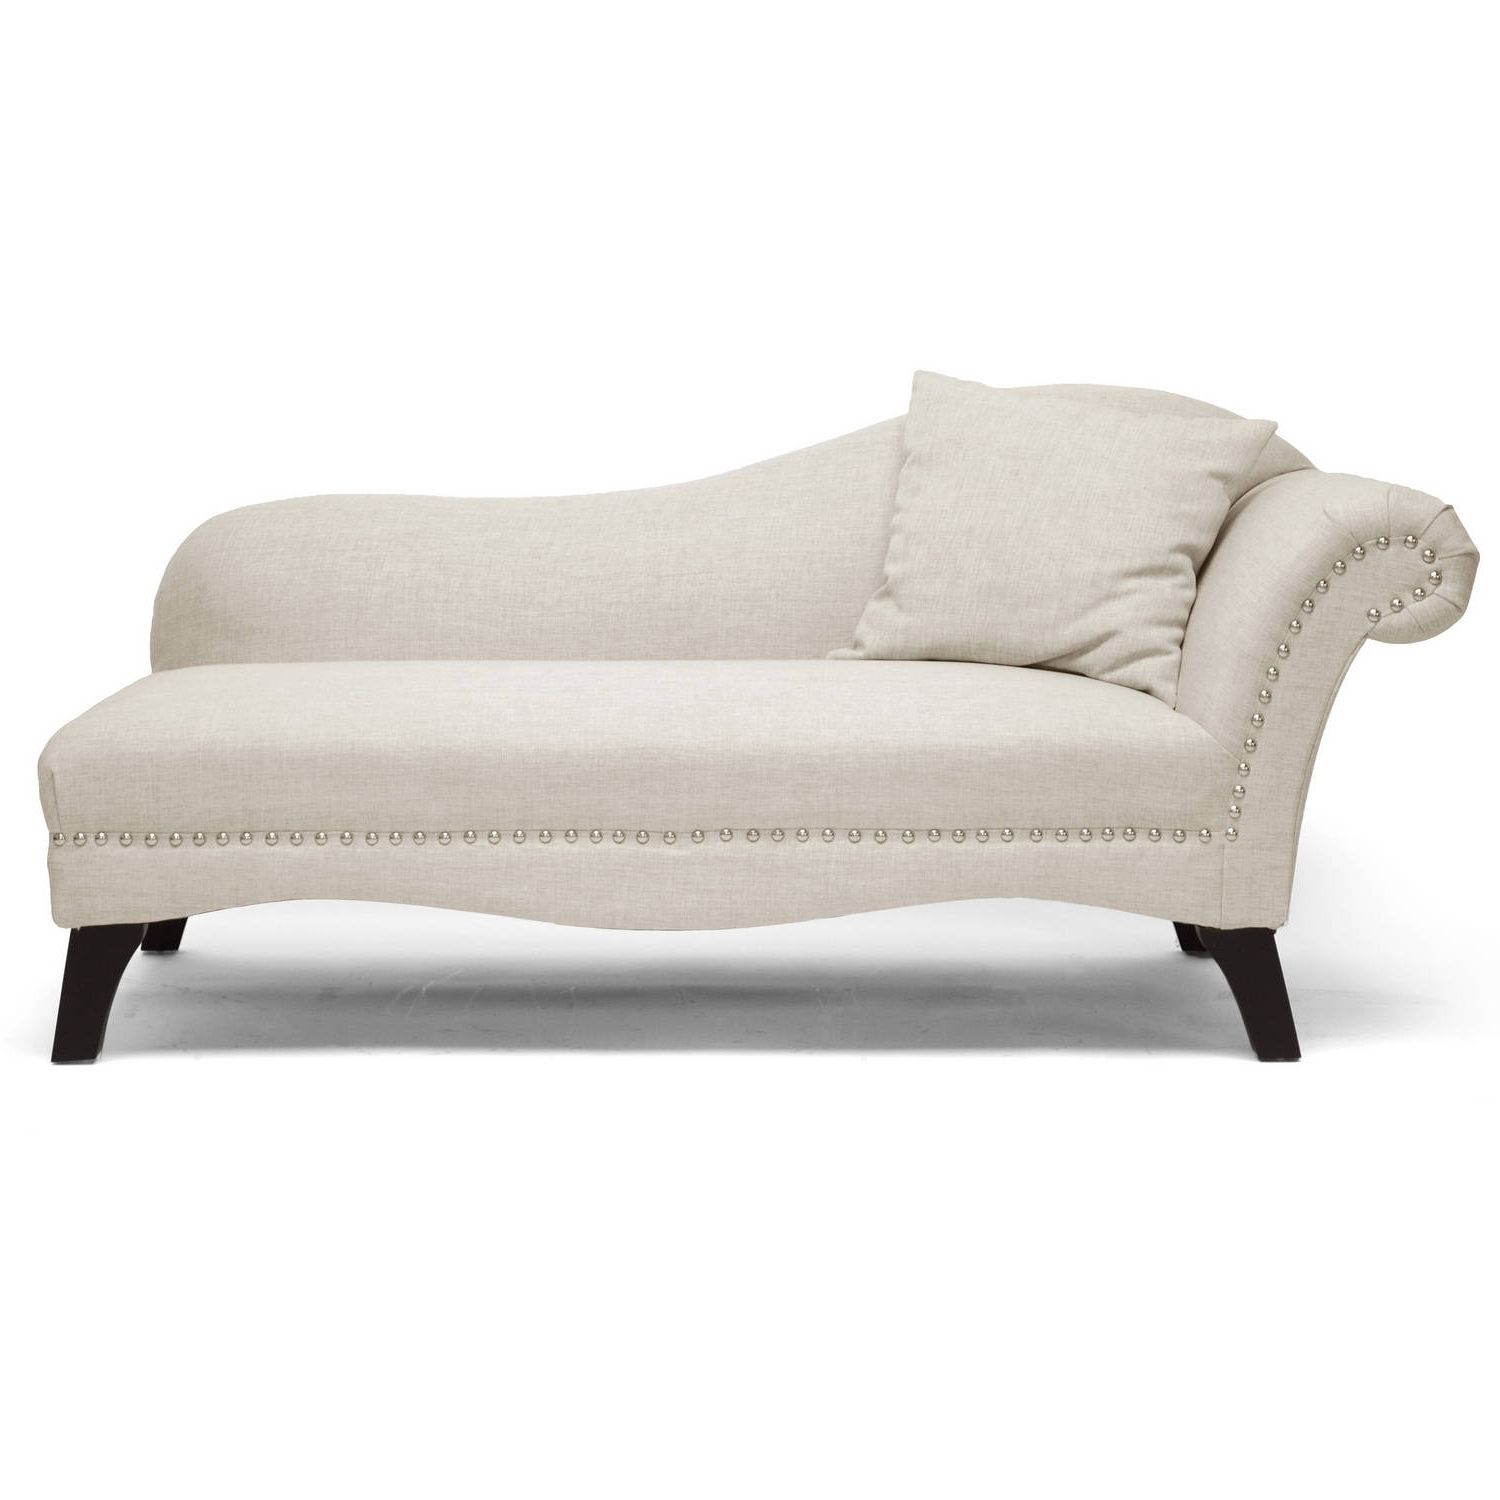 Most Popular Chaise Lounge Sofas Regarding Chaise Lounges – Walmart (View 1 of 15)